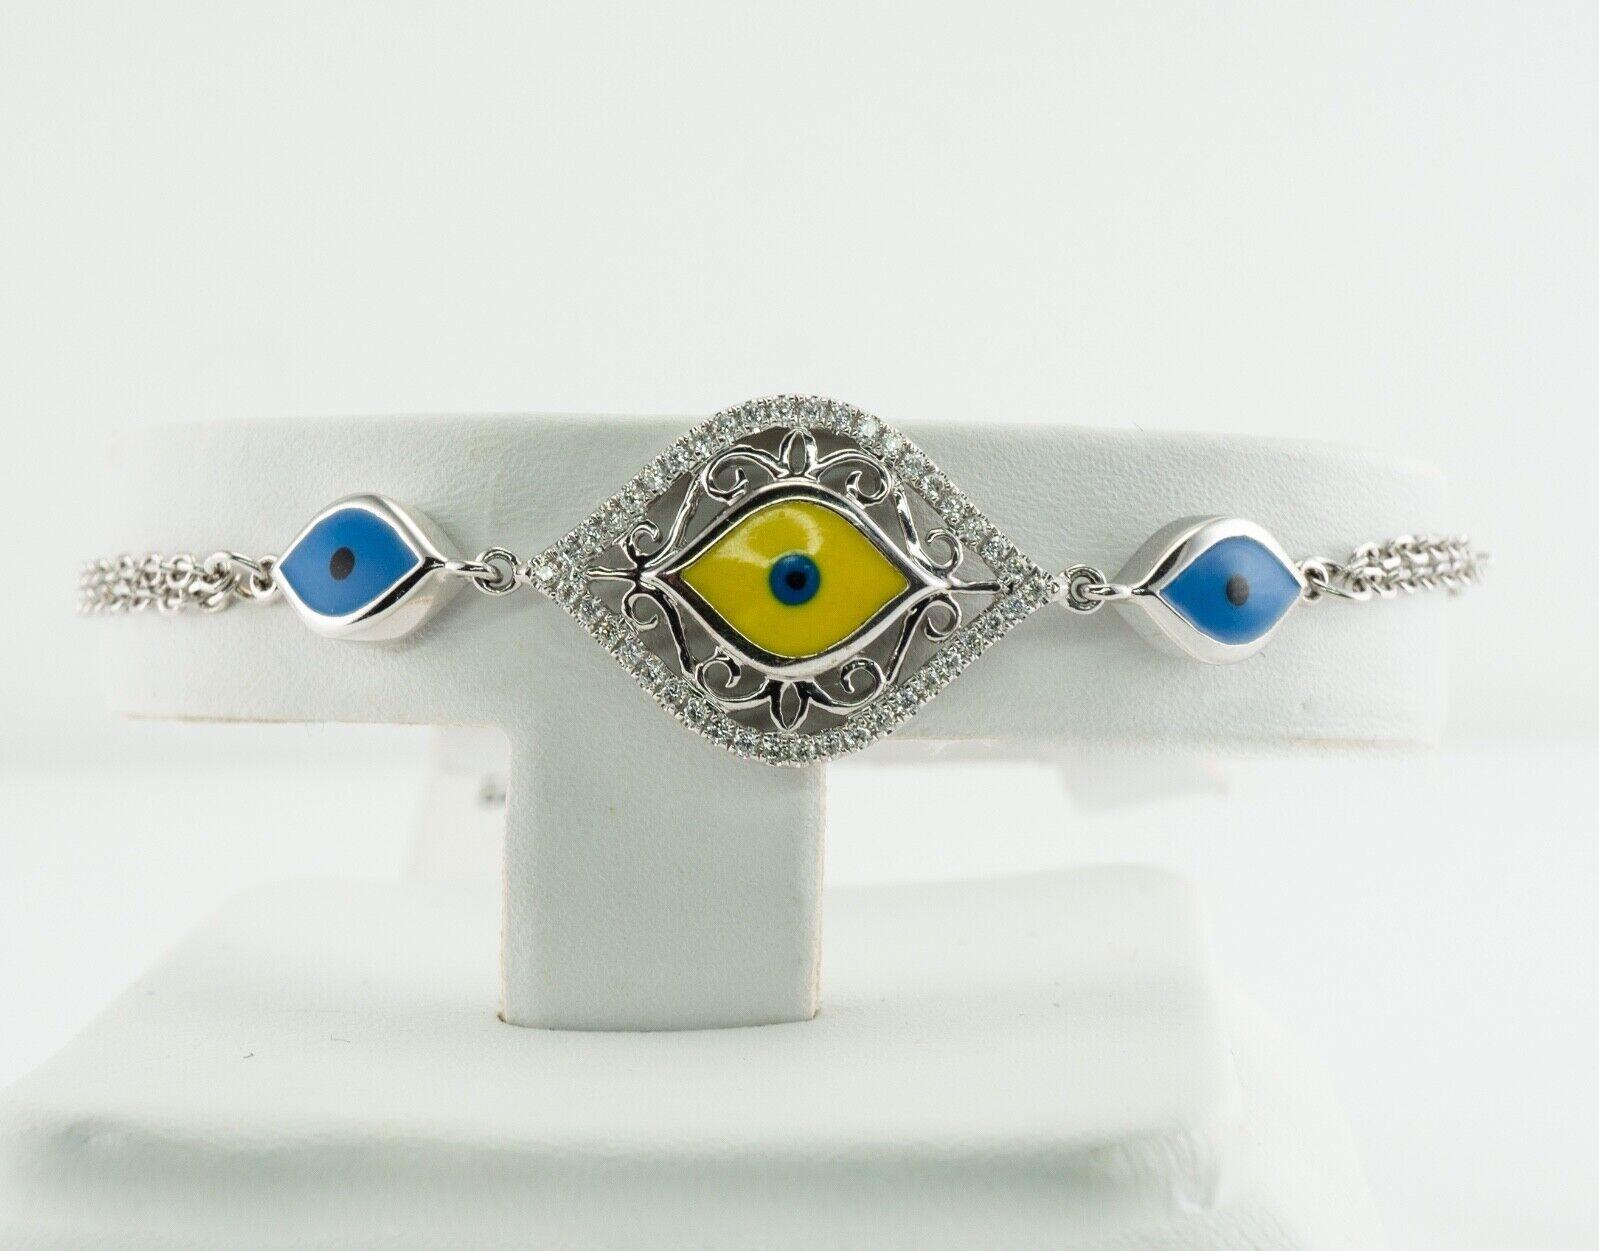 Evil Eye Enamel Diamond Bracelet 14K White Gold Brand NWT

This bracelet is a brand new with a $1930 tag. The bracelet is crafted in solid 14K White Gold. The center piece with yellow, blue, and black enamel and diamonds around it measures 20mm x